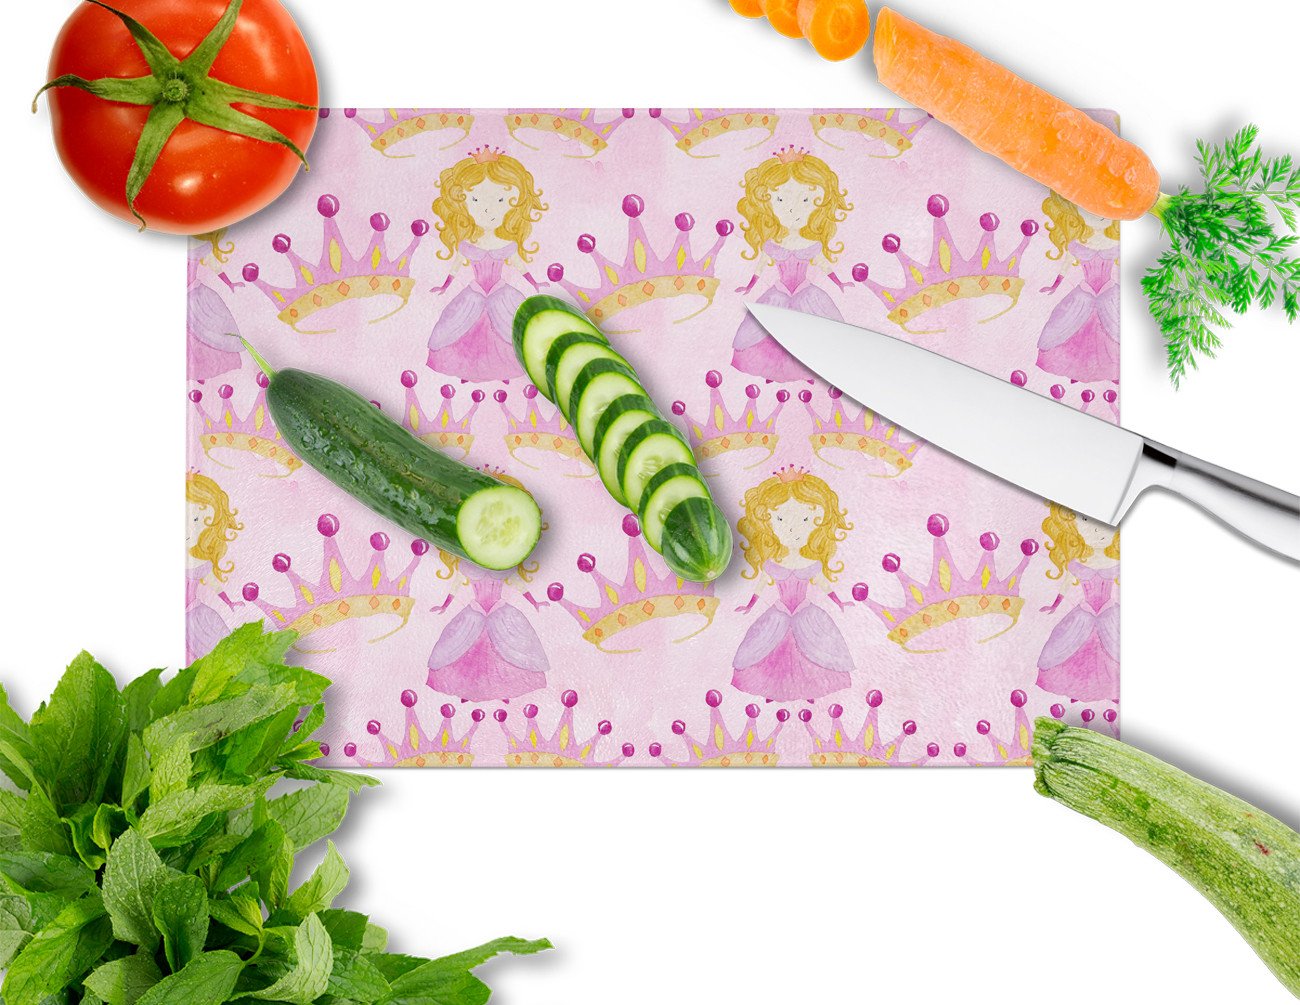 Watercolor Princess and Crown Glass Cutting Board Large BB7551LCB by Caroline's Treasures